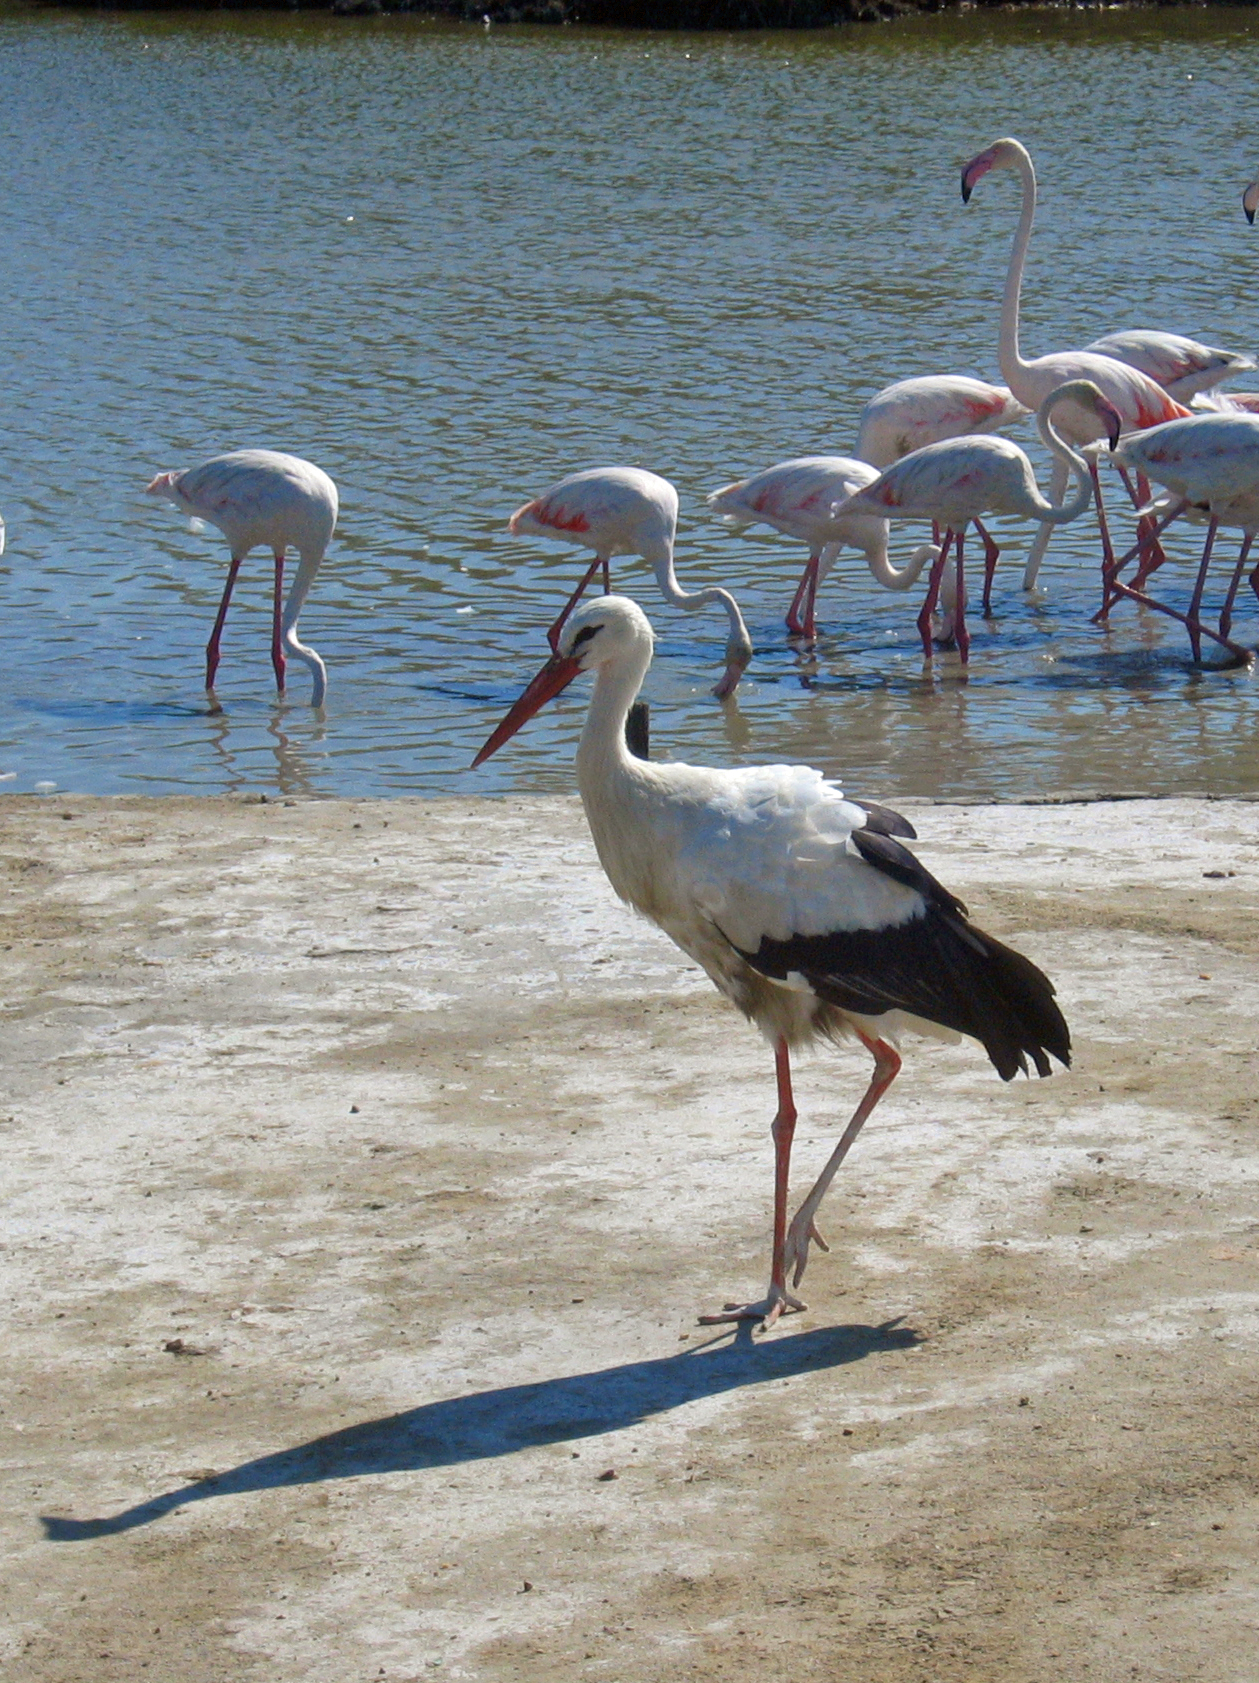 white birds with red beaks wading near water